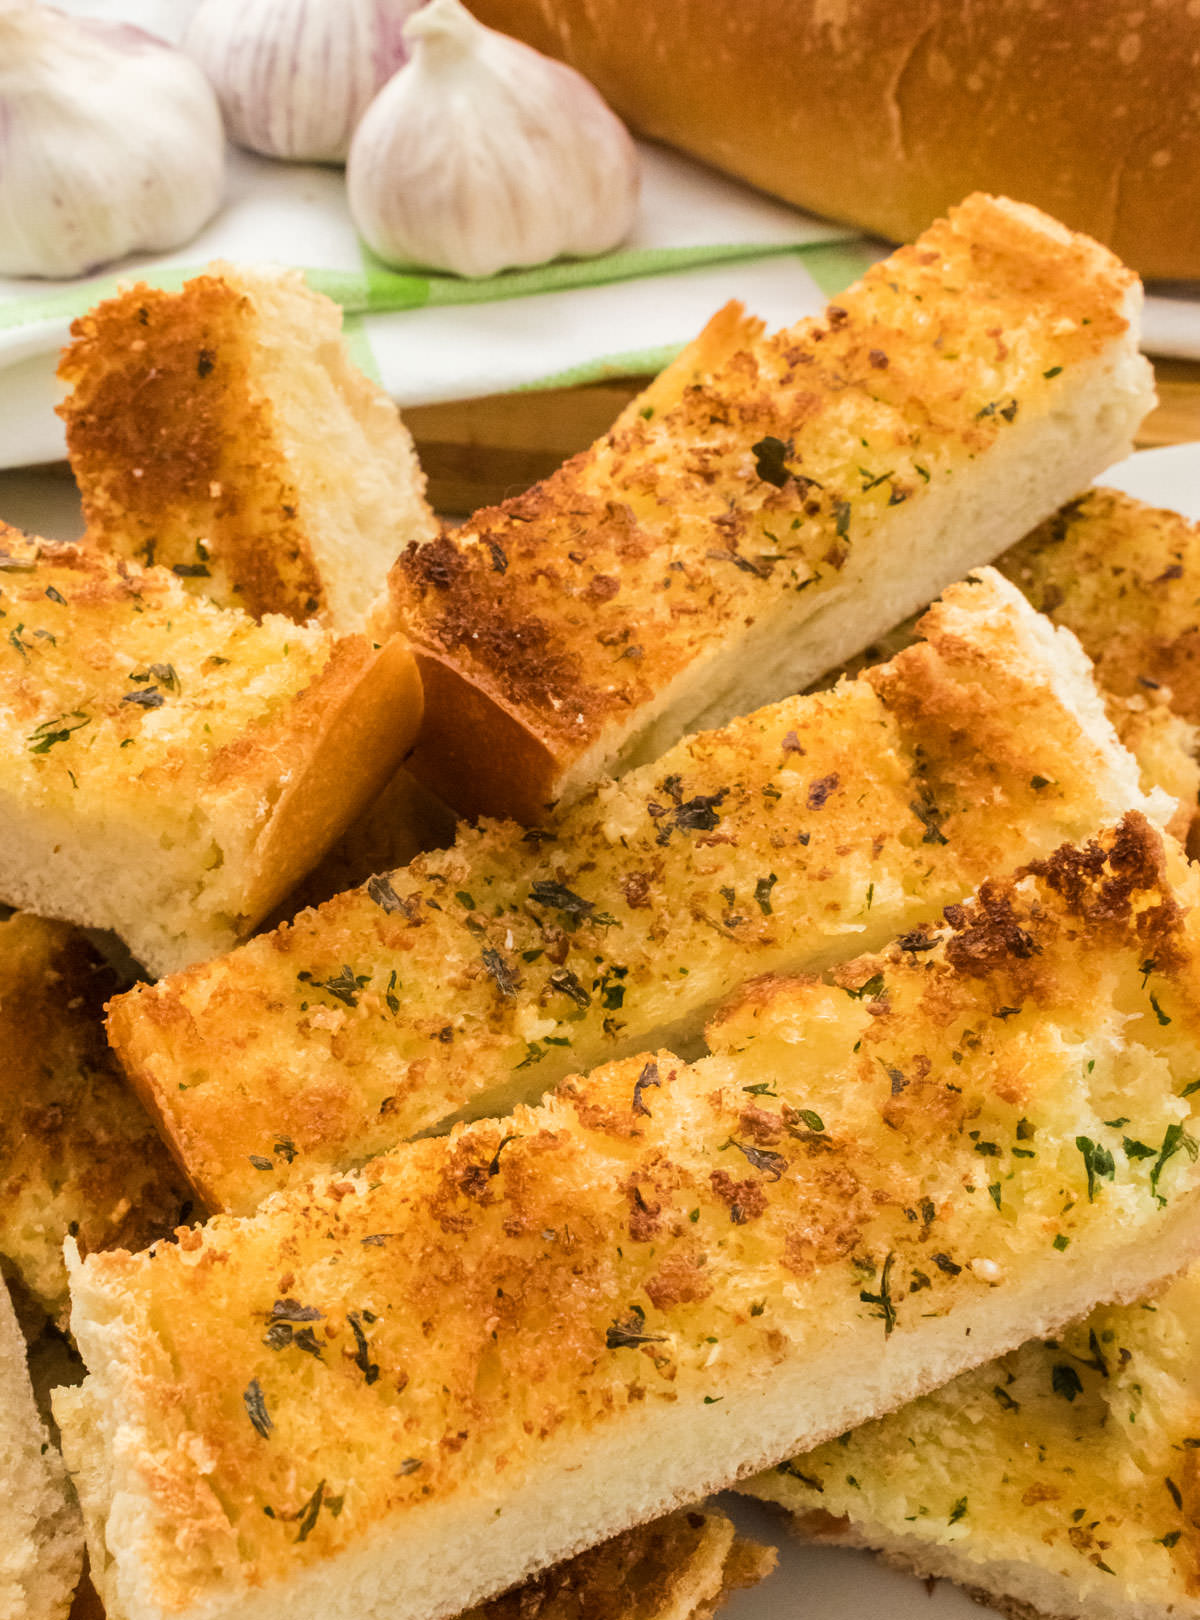 Closeup on a stack of Garlic Bread pieces stacked on a white serving dish on a table in front of heads of garlic and a loaf of French Bread.